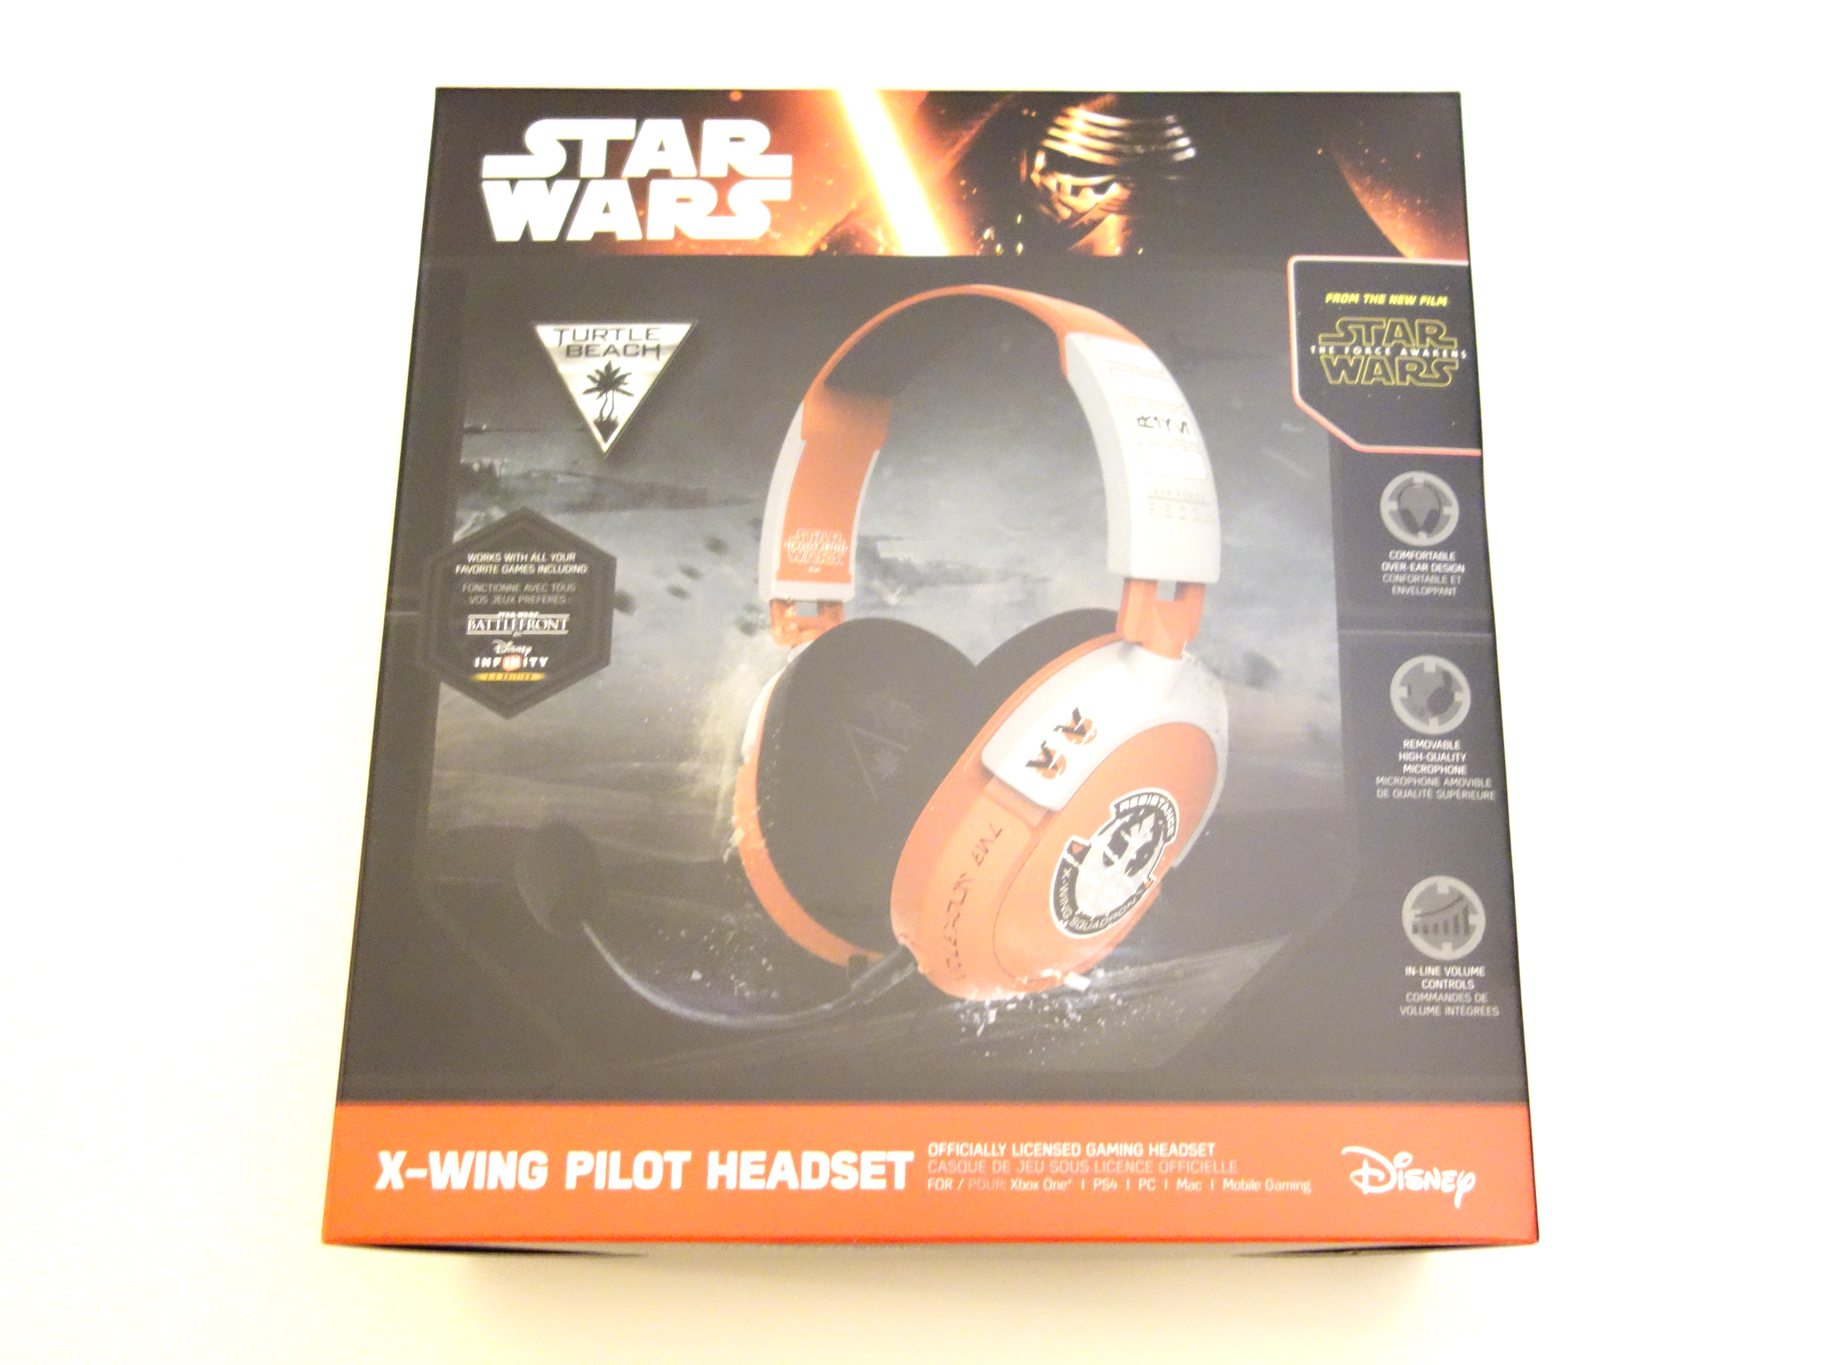 Turtle Beach Star Wars X-Wing Pilot Gaming Headset review box front